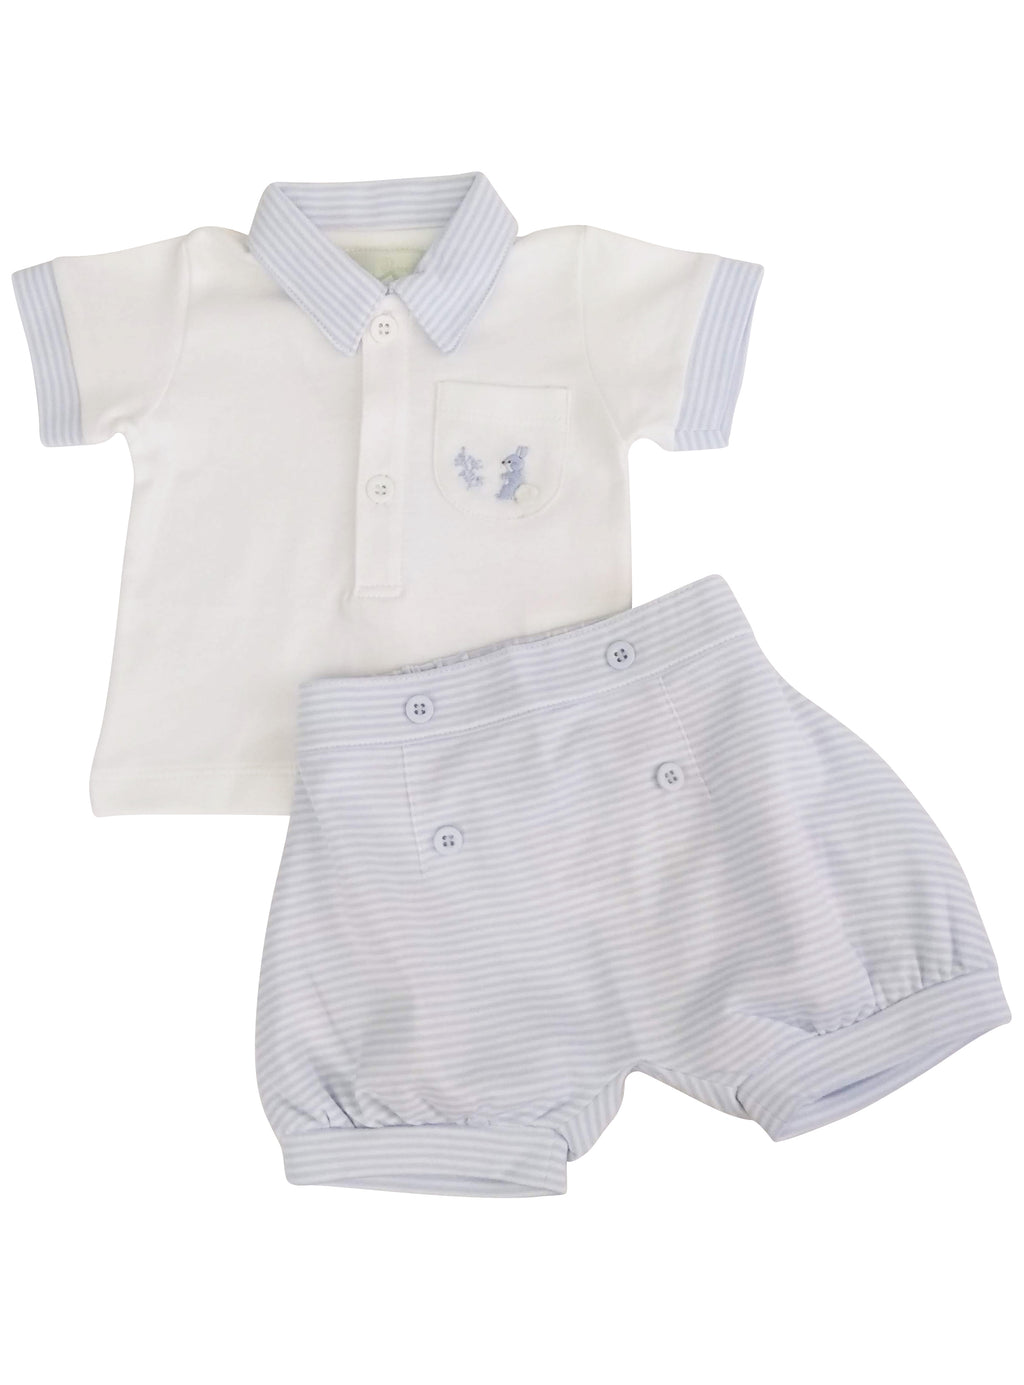 Baby Boy's Striped Bunny Shirt and Shorts Set - Little Threads Inc. Children's Clothing